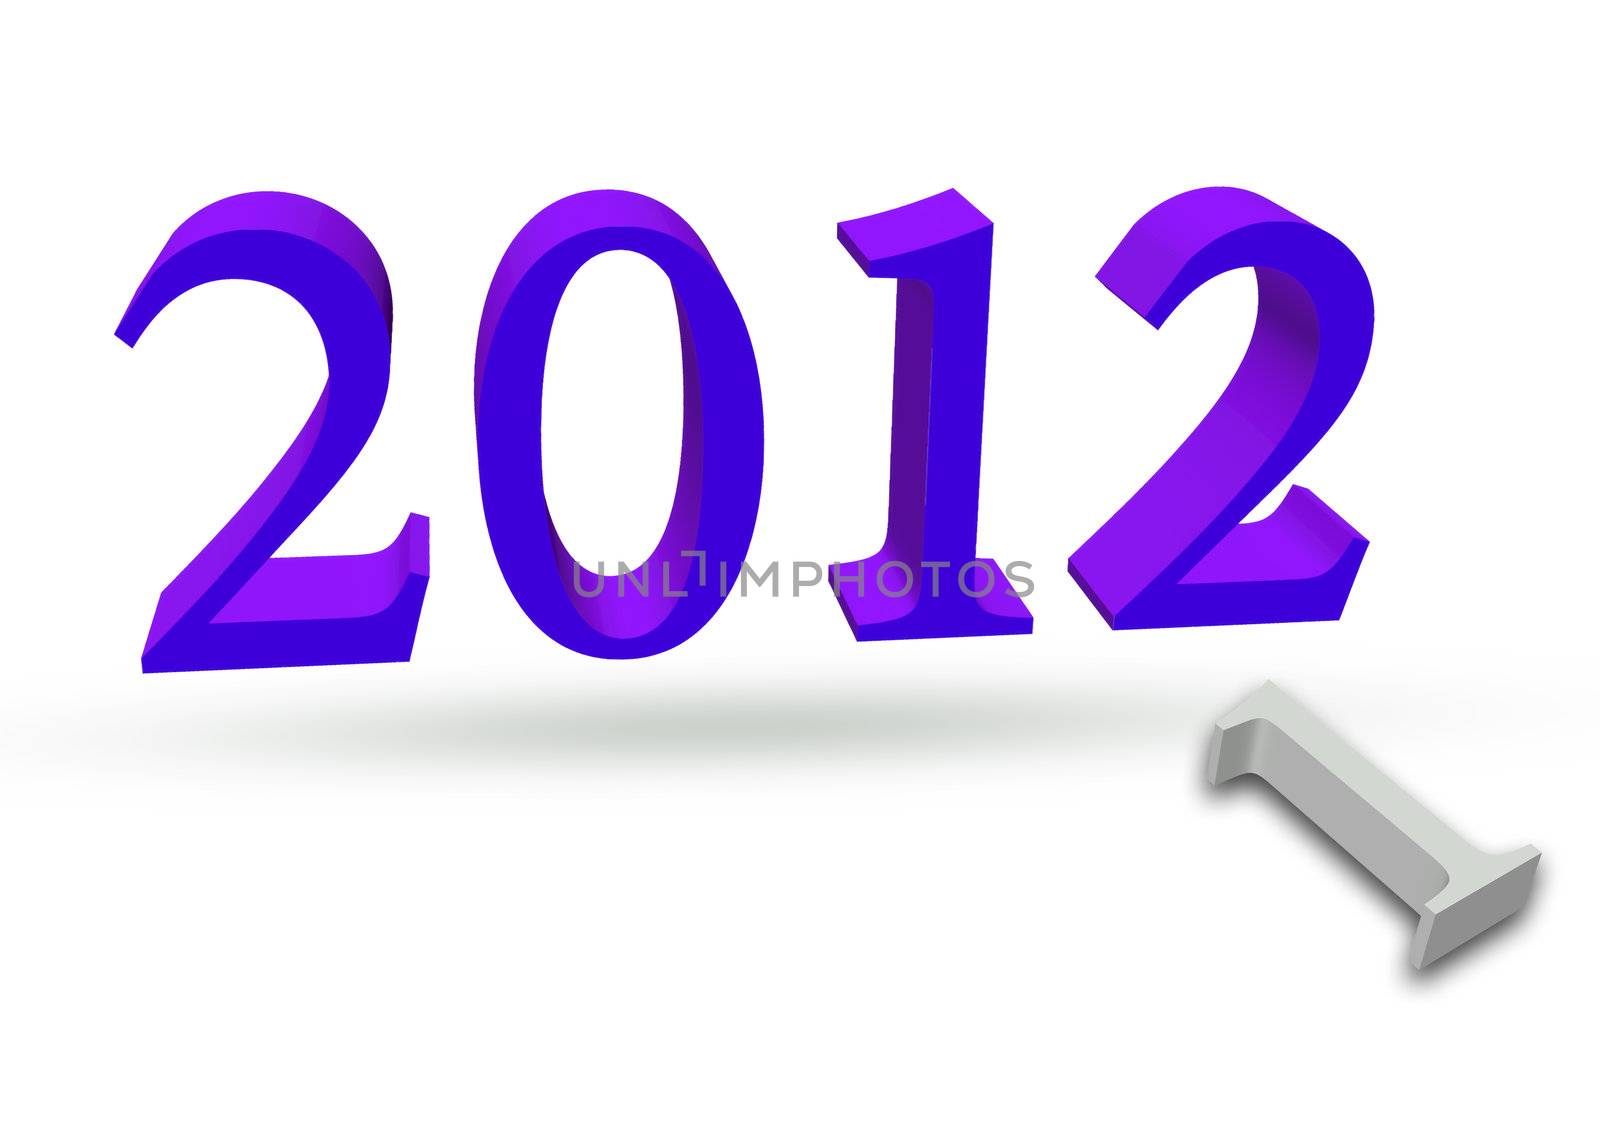 New year 2012 3d render